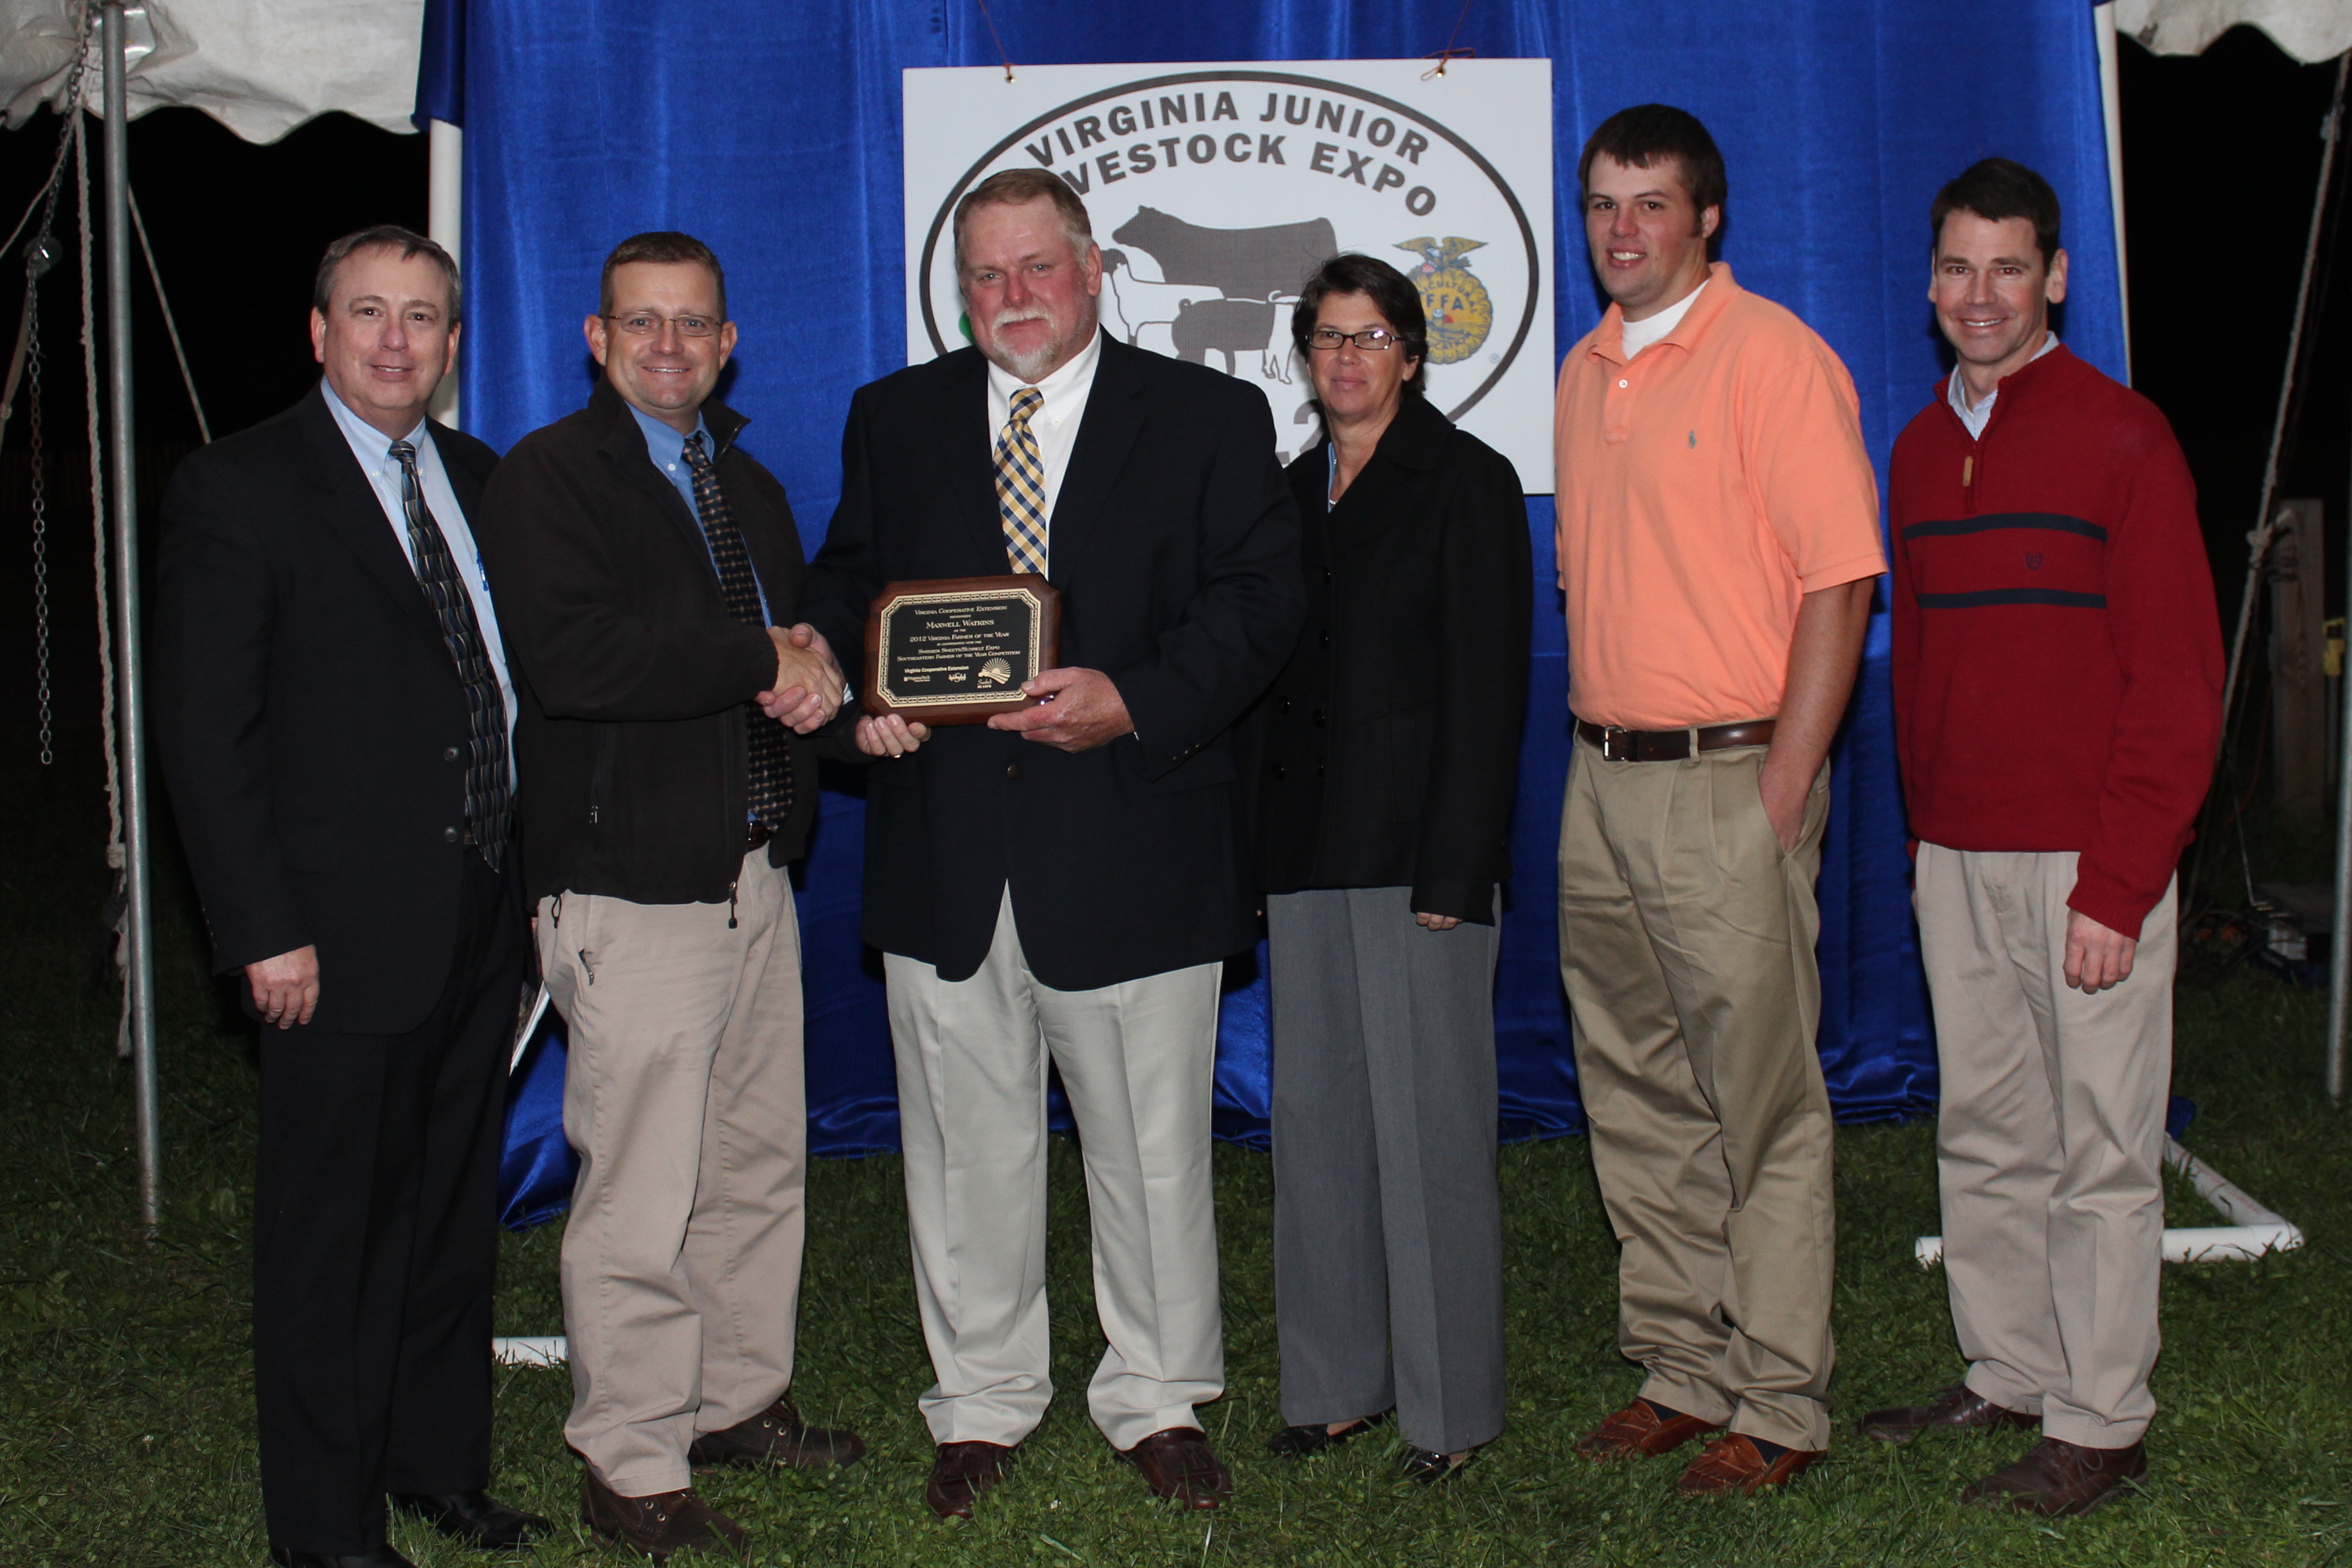 The Farmer of the Year award is presented to Maxwell Watkins.